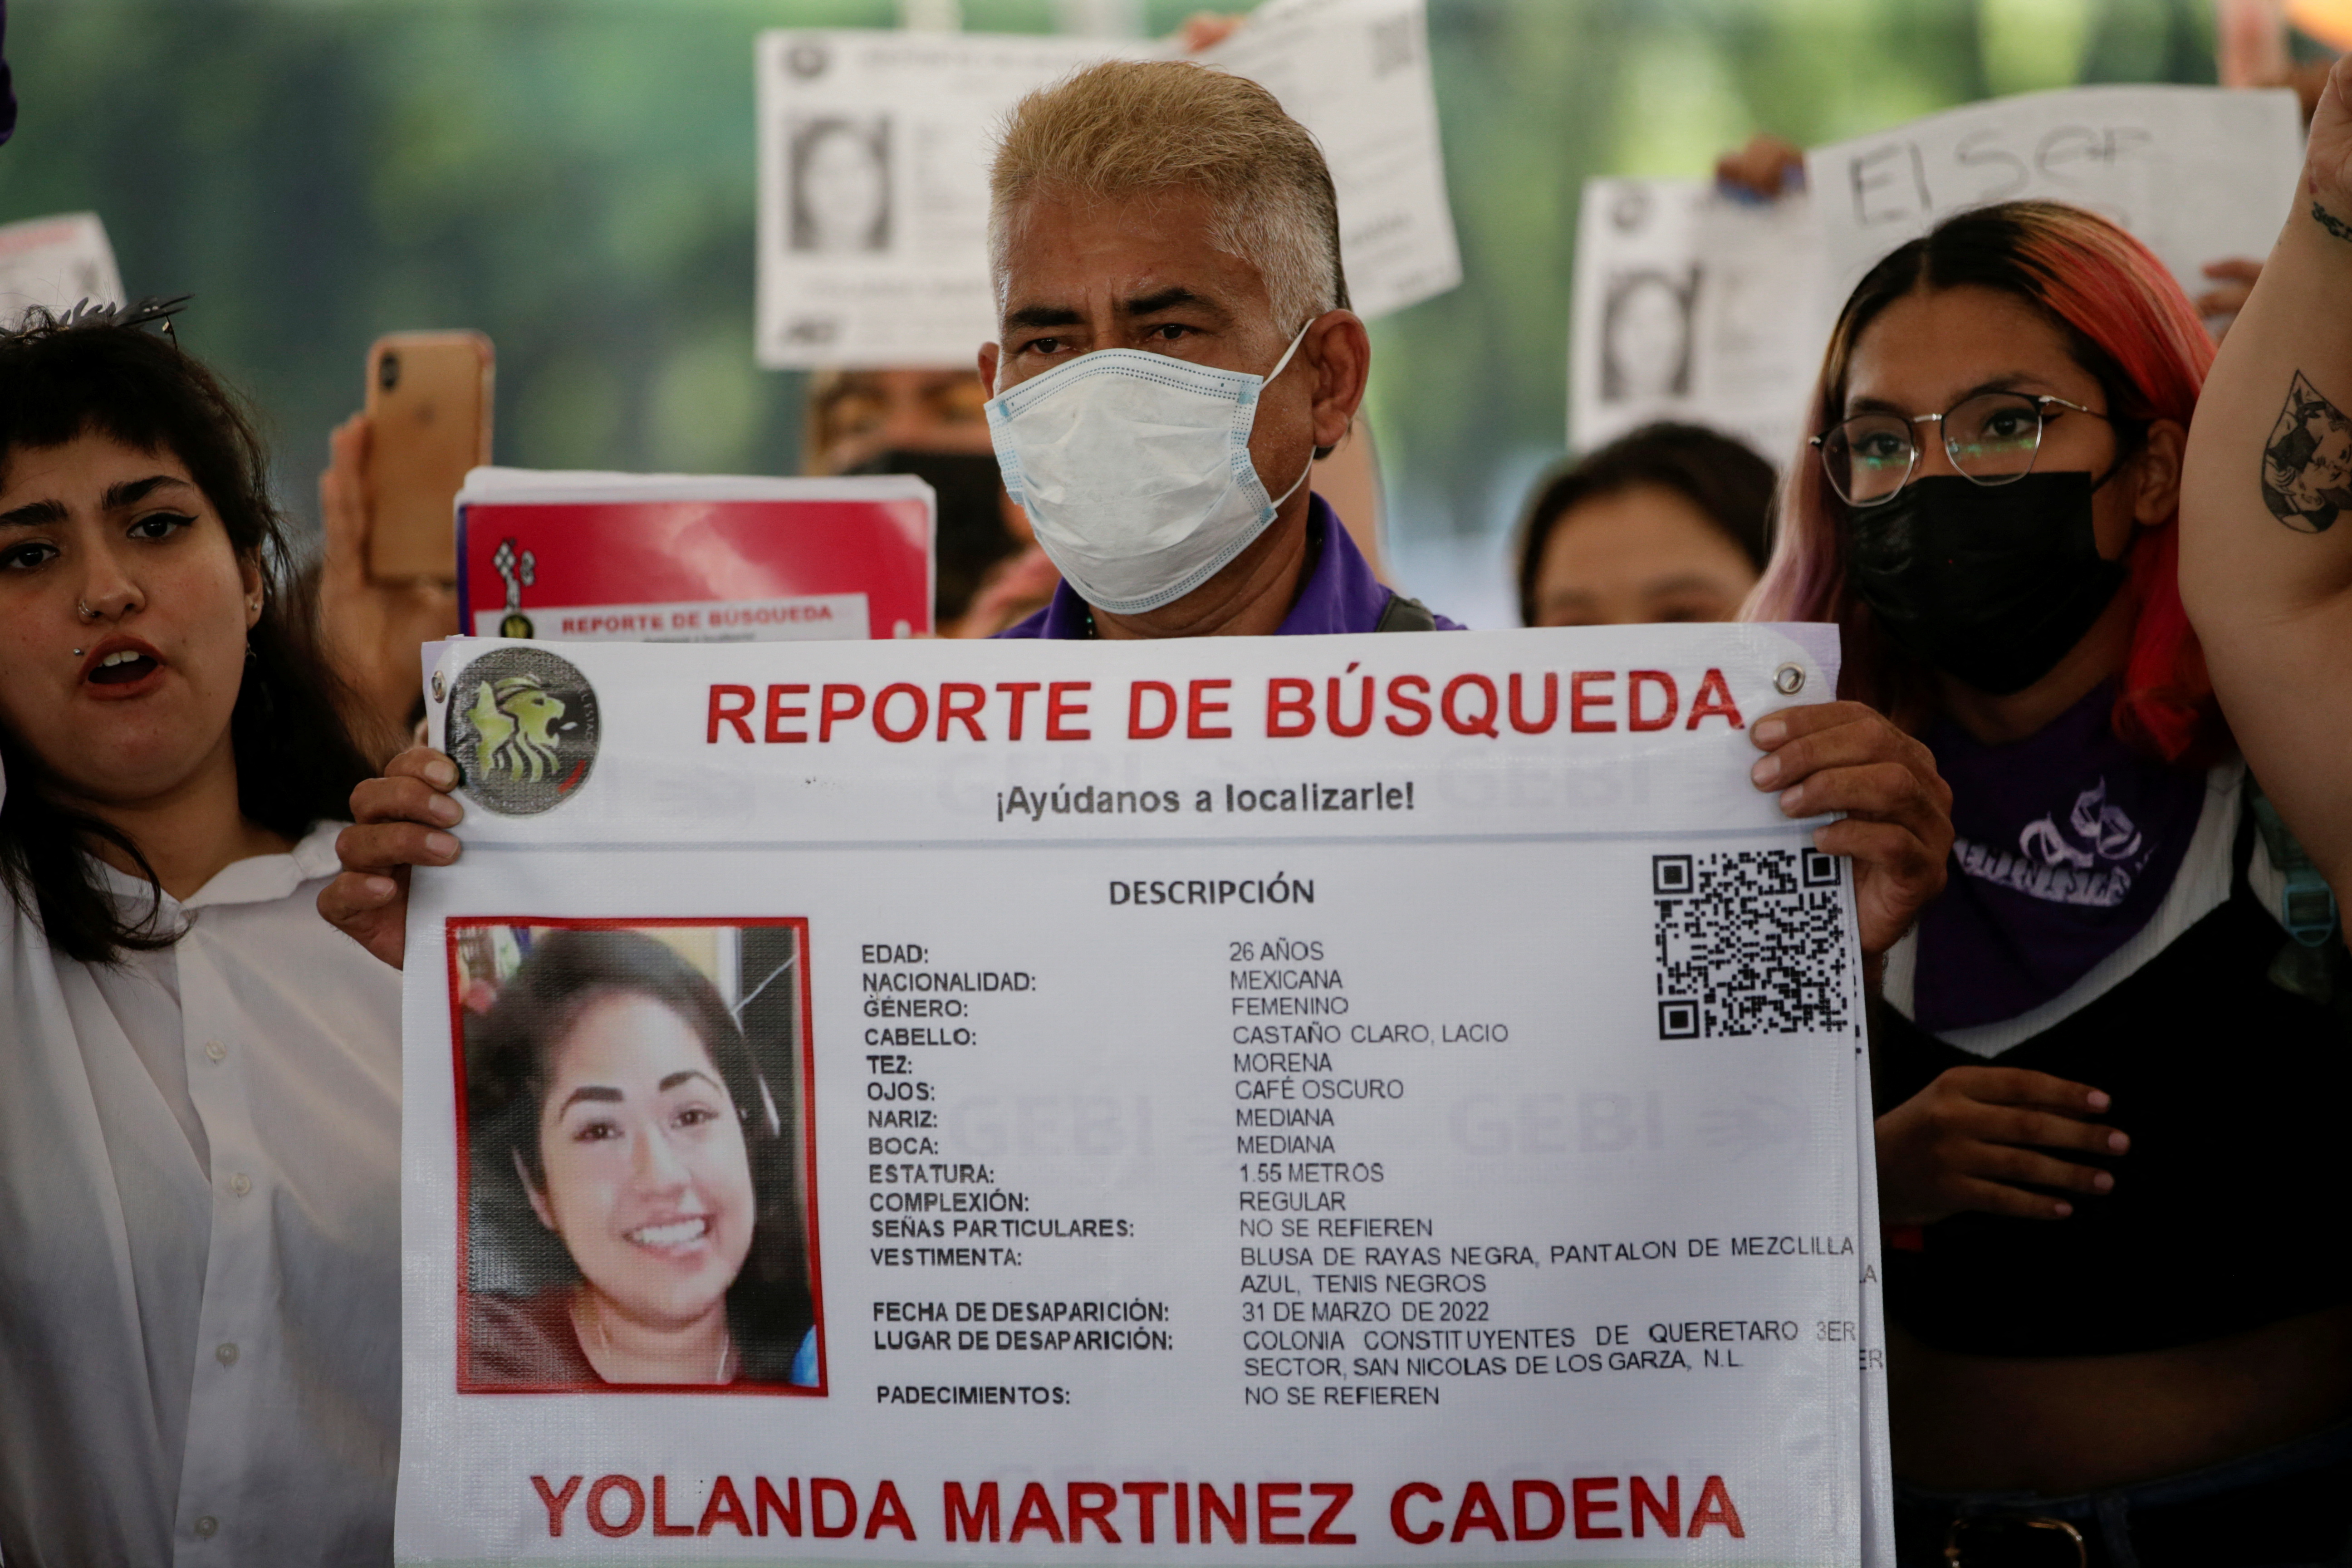 Gerardo Martinez, father of Yolanda Martinez, a 26-year-old woman who disappeared on March 31, holds a banner with information of his daughter during a protest demanding the government to find her alive, in Monterrey, Mexico April 29, 2022. REUTERS/Daniel Becerril